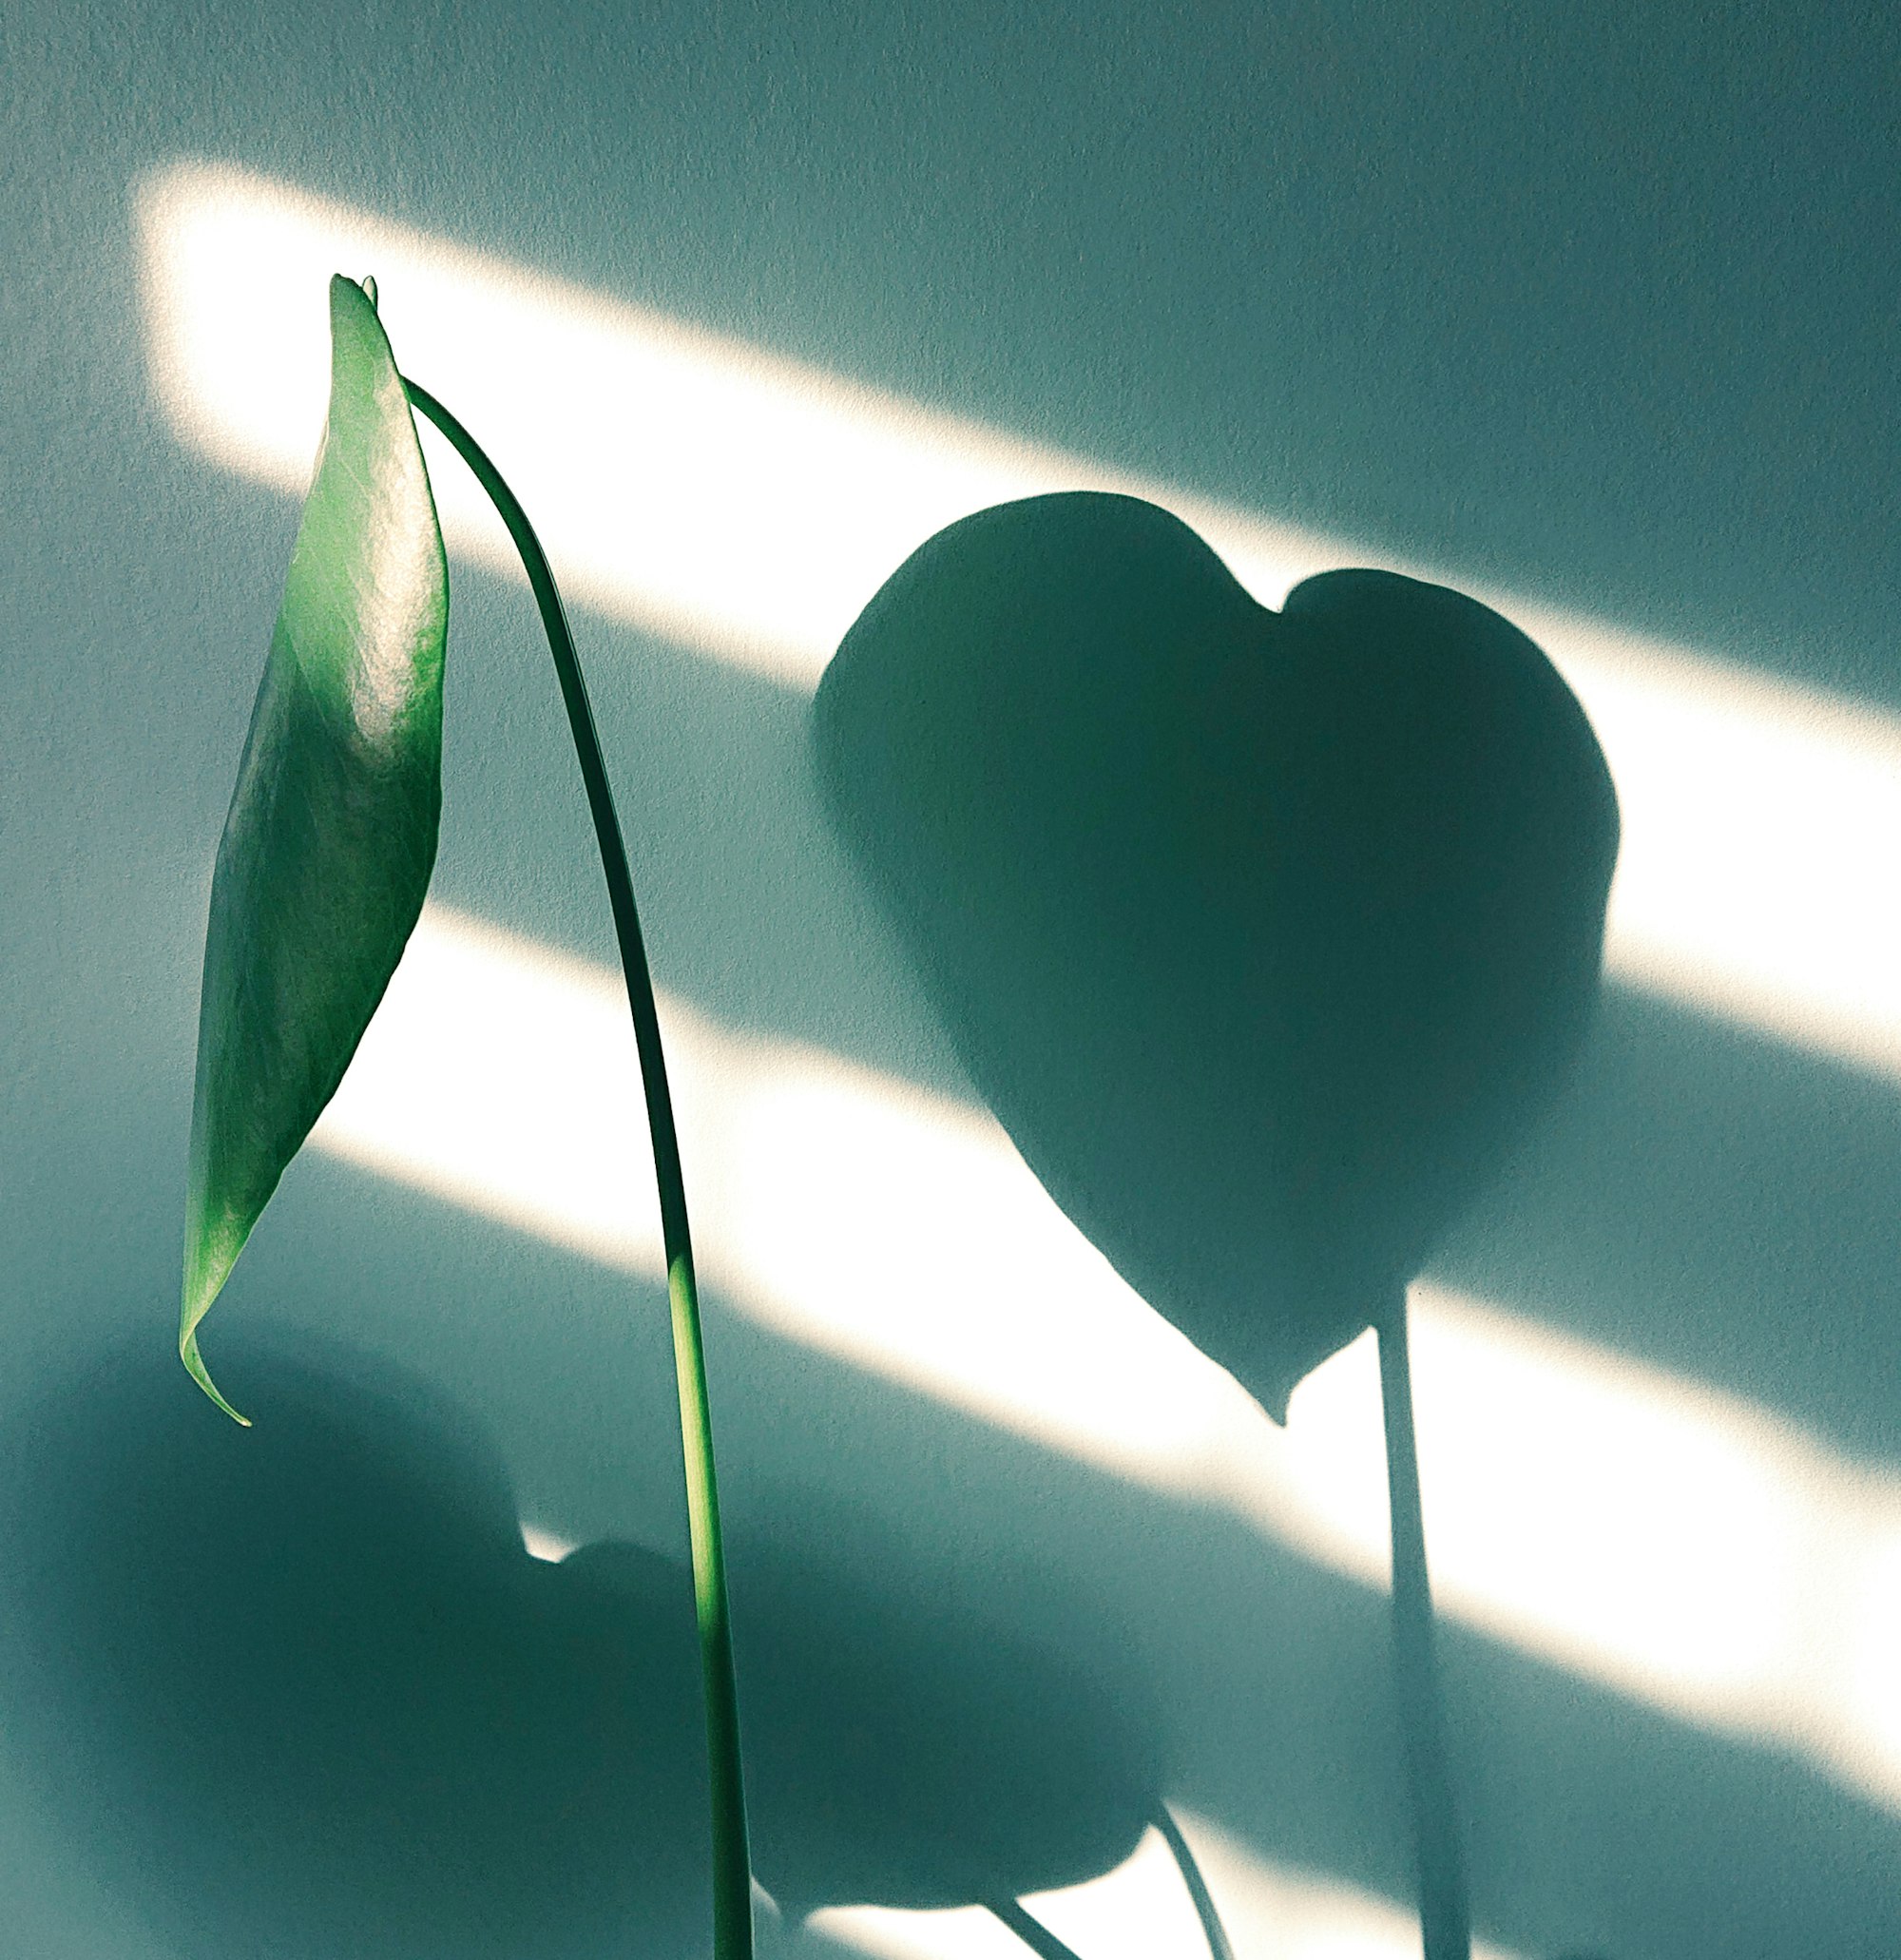 Concept of love and nature: a heart-shaped houseplant